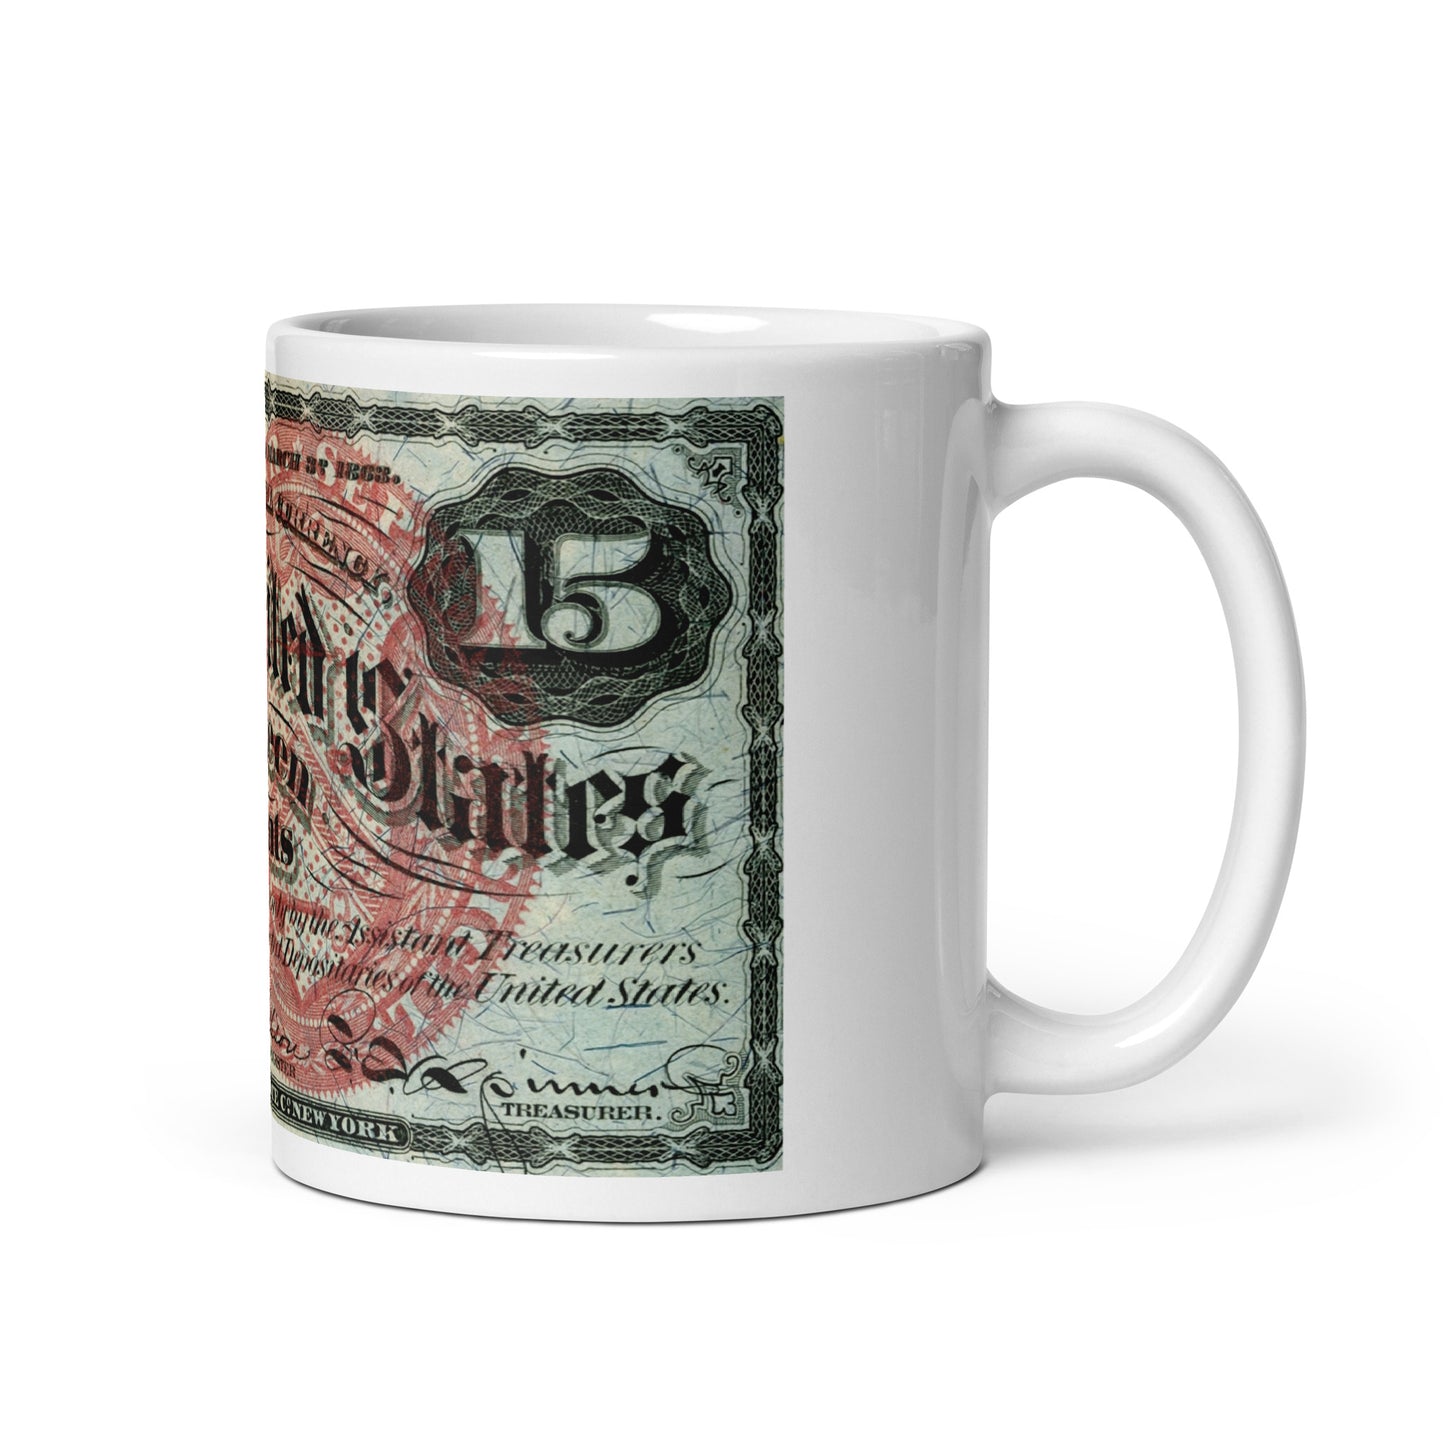 15 Cents 4TH Issue Fractional Currency Edition - Classic Currency Collector's Mug